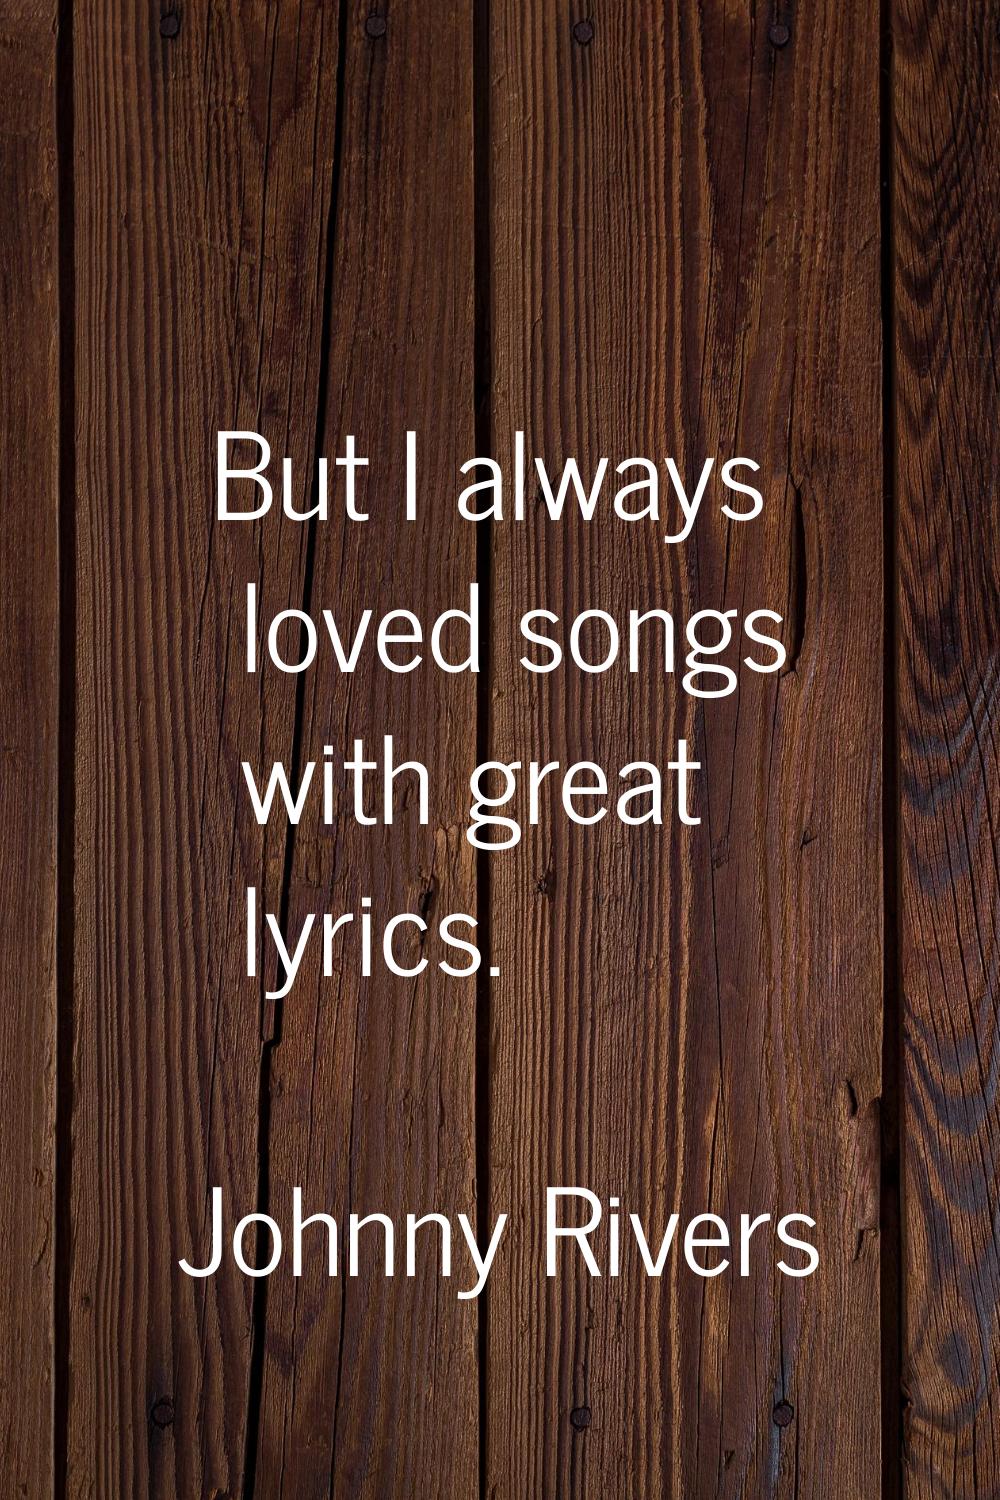 But I always loved songs with great lyrics.